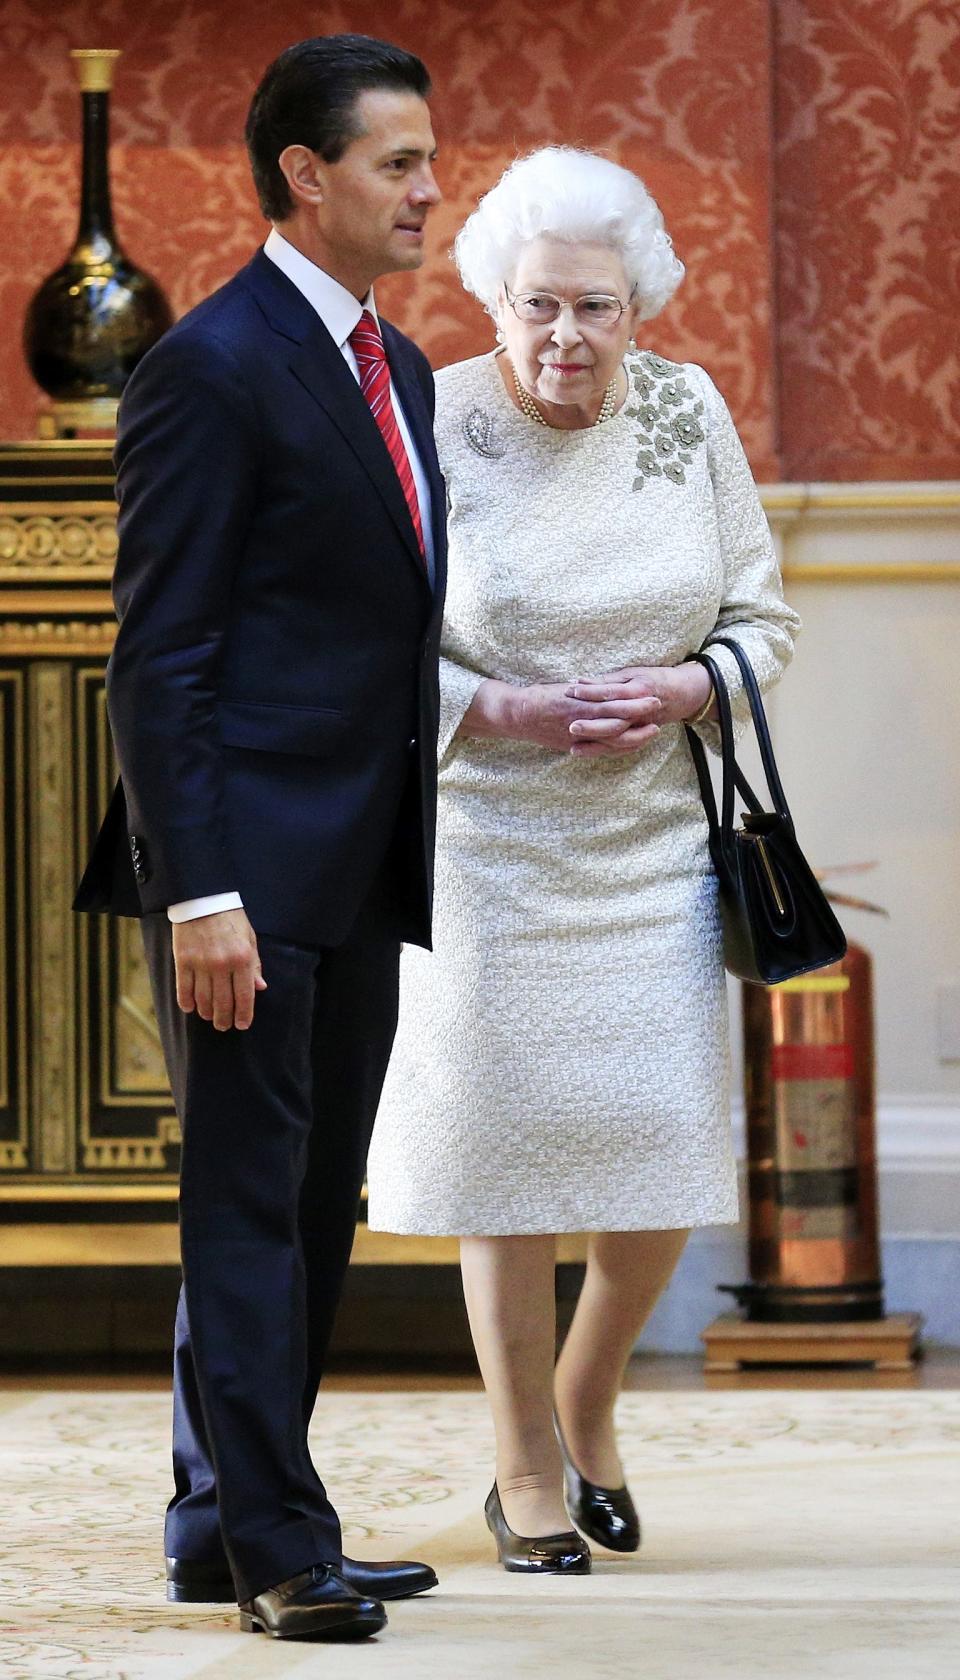 The President of Mexico Enrique Pena Nieto is shown into the Picture Gallery to view Mexican items in the Royal Collection by Britain's Queen Elizabeth at Buckingham Palace, London